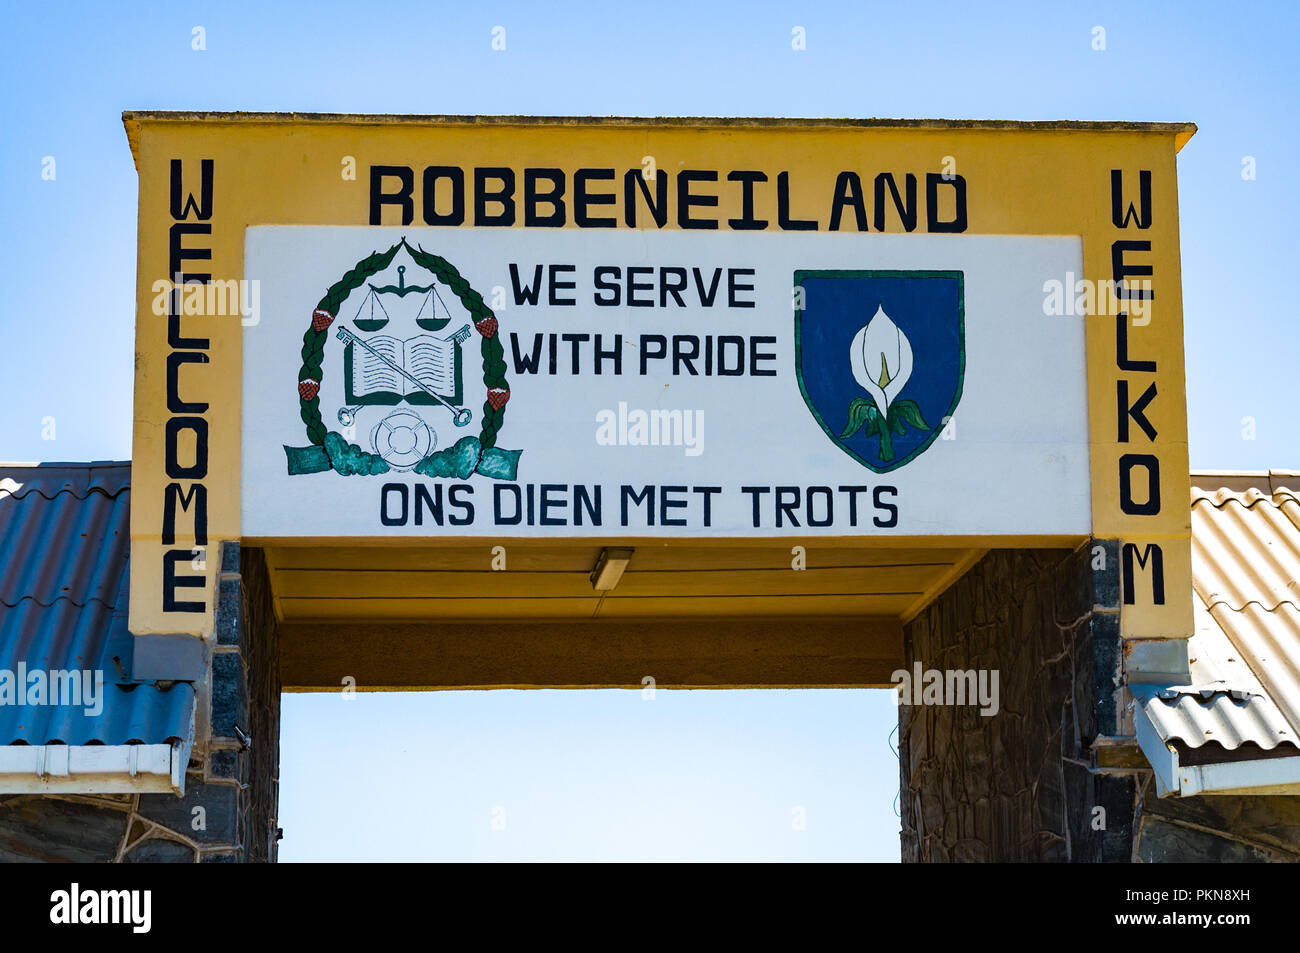 The welcome sign for Robben Island (Robbeneiland), South Africa, saying 'we serve with pride' Stock Photo